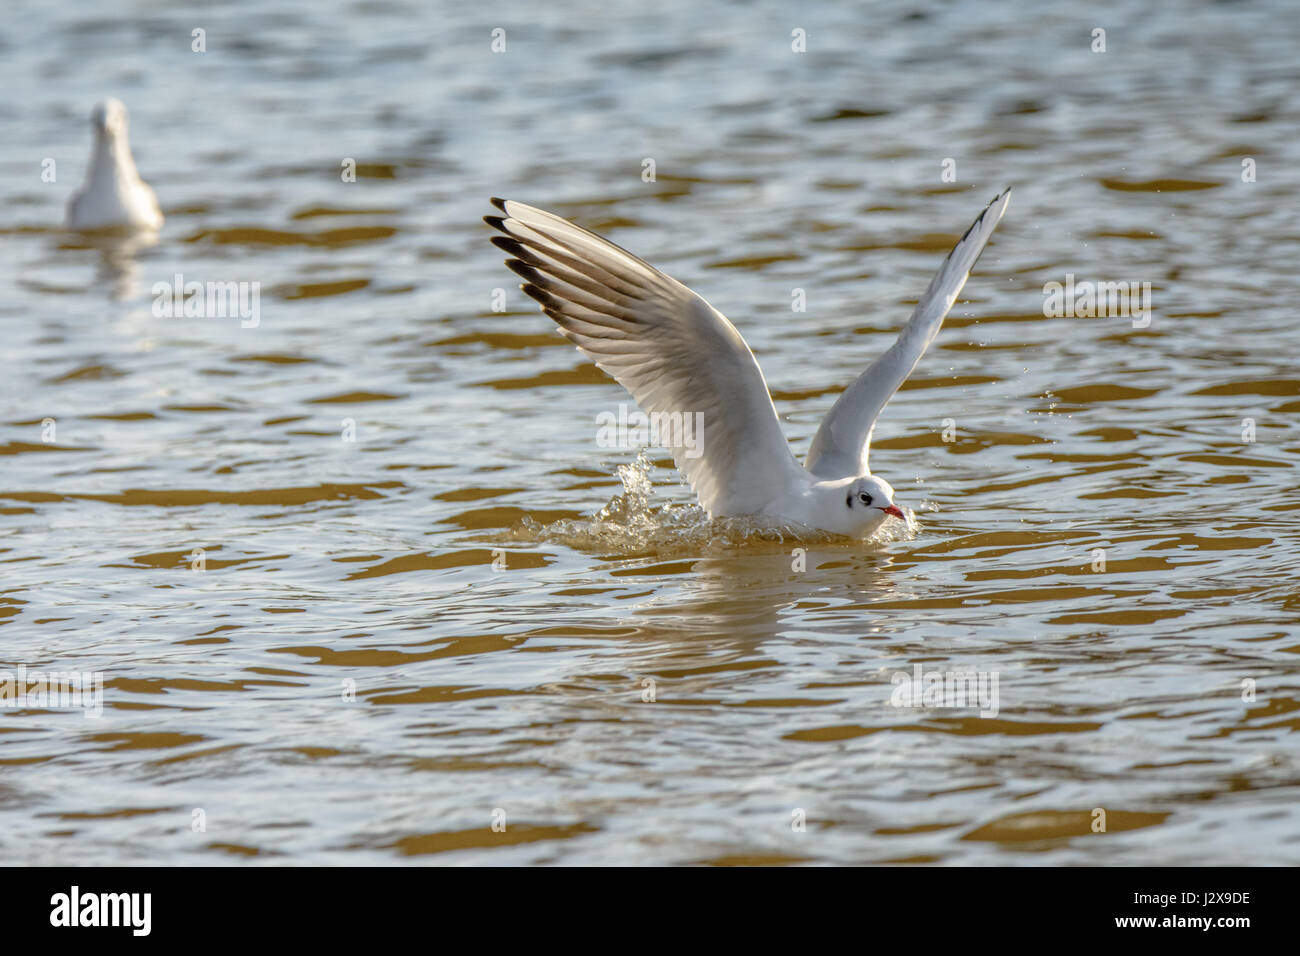 A black capped gull landing on the water Stock Photo